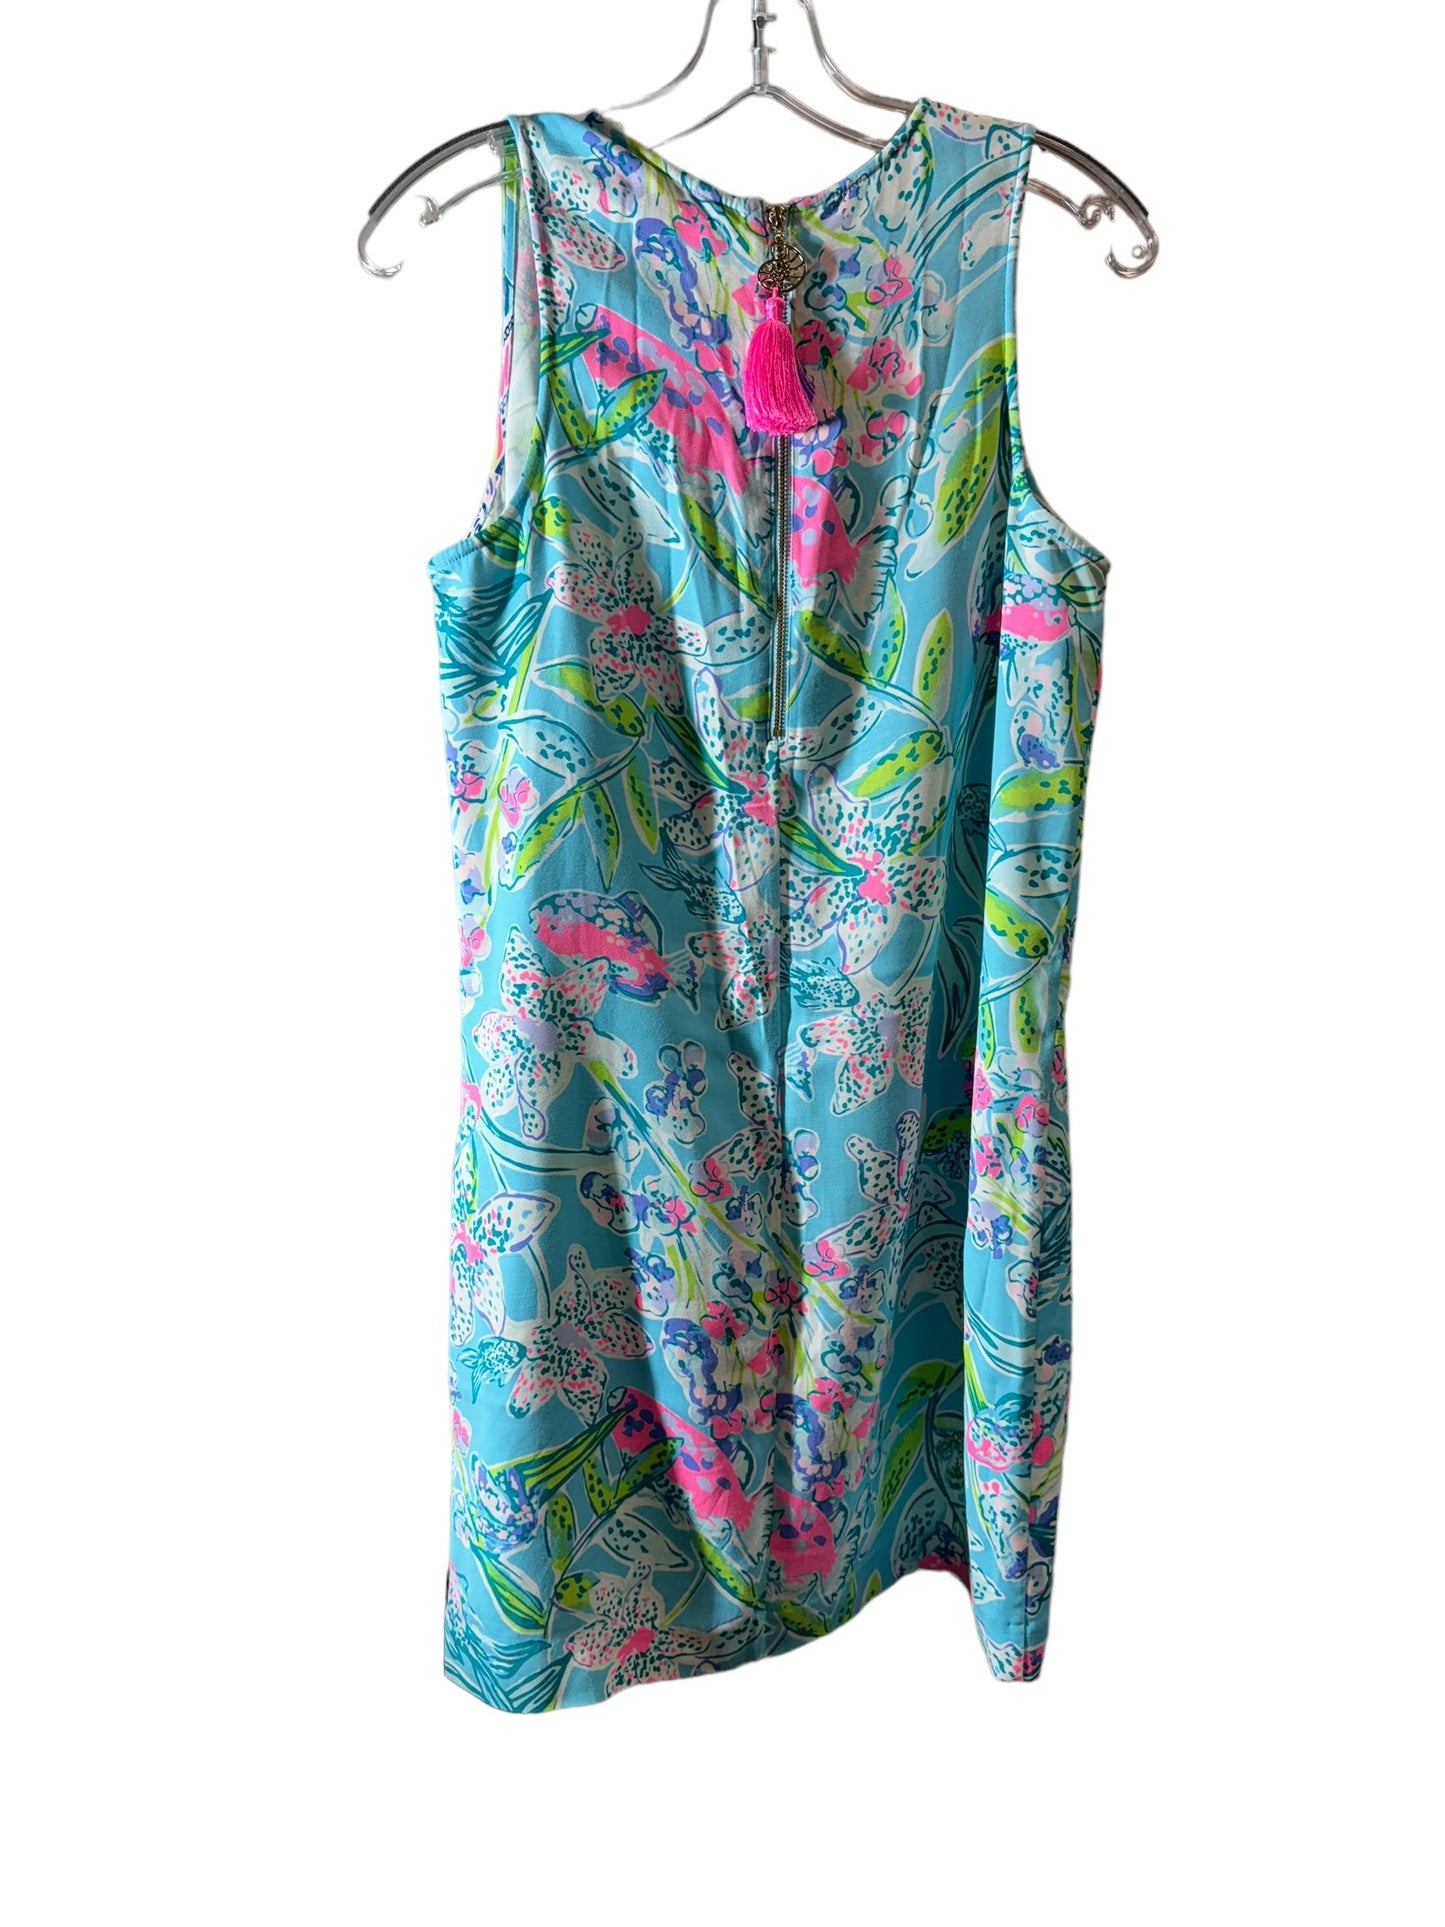 Blue & Green Dress Casual Short Lilly Pulitzer, Size 4